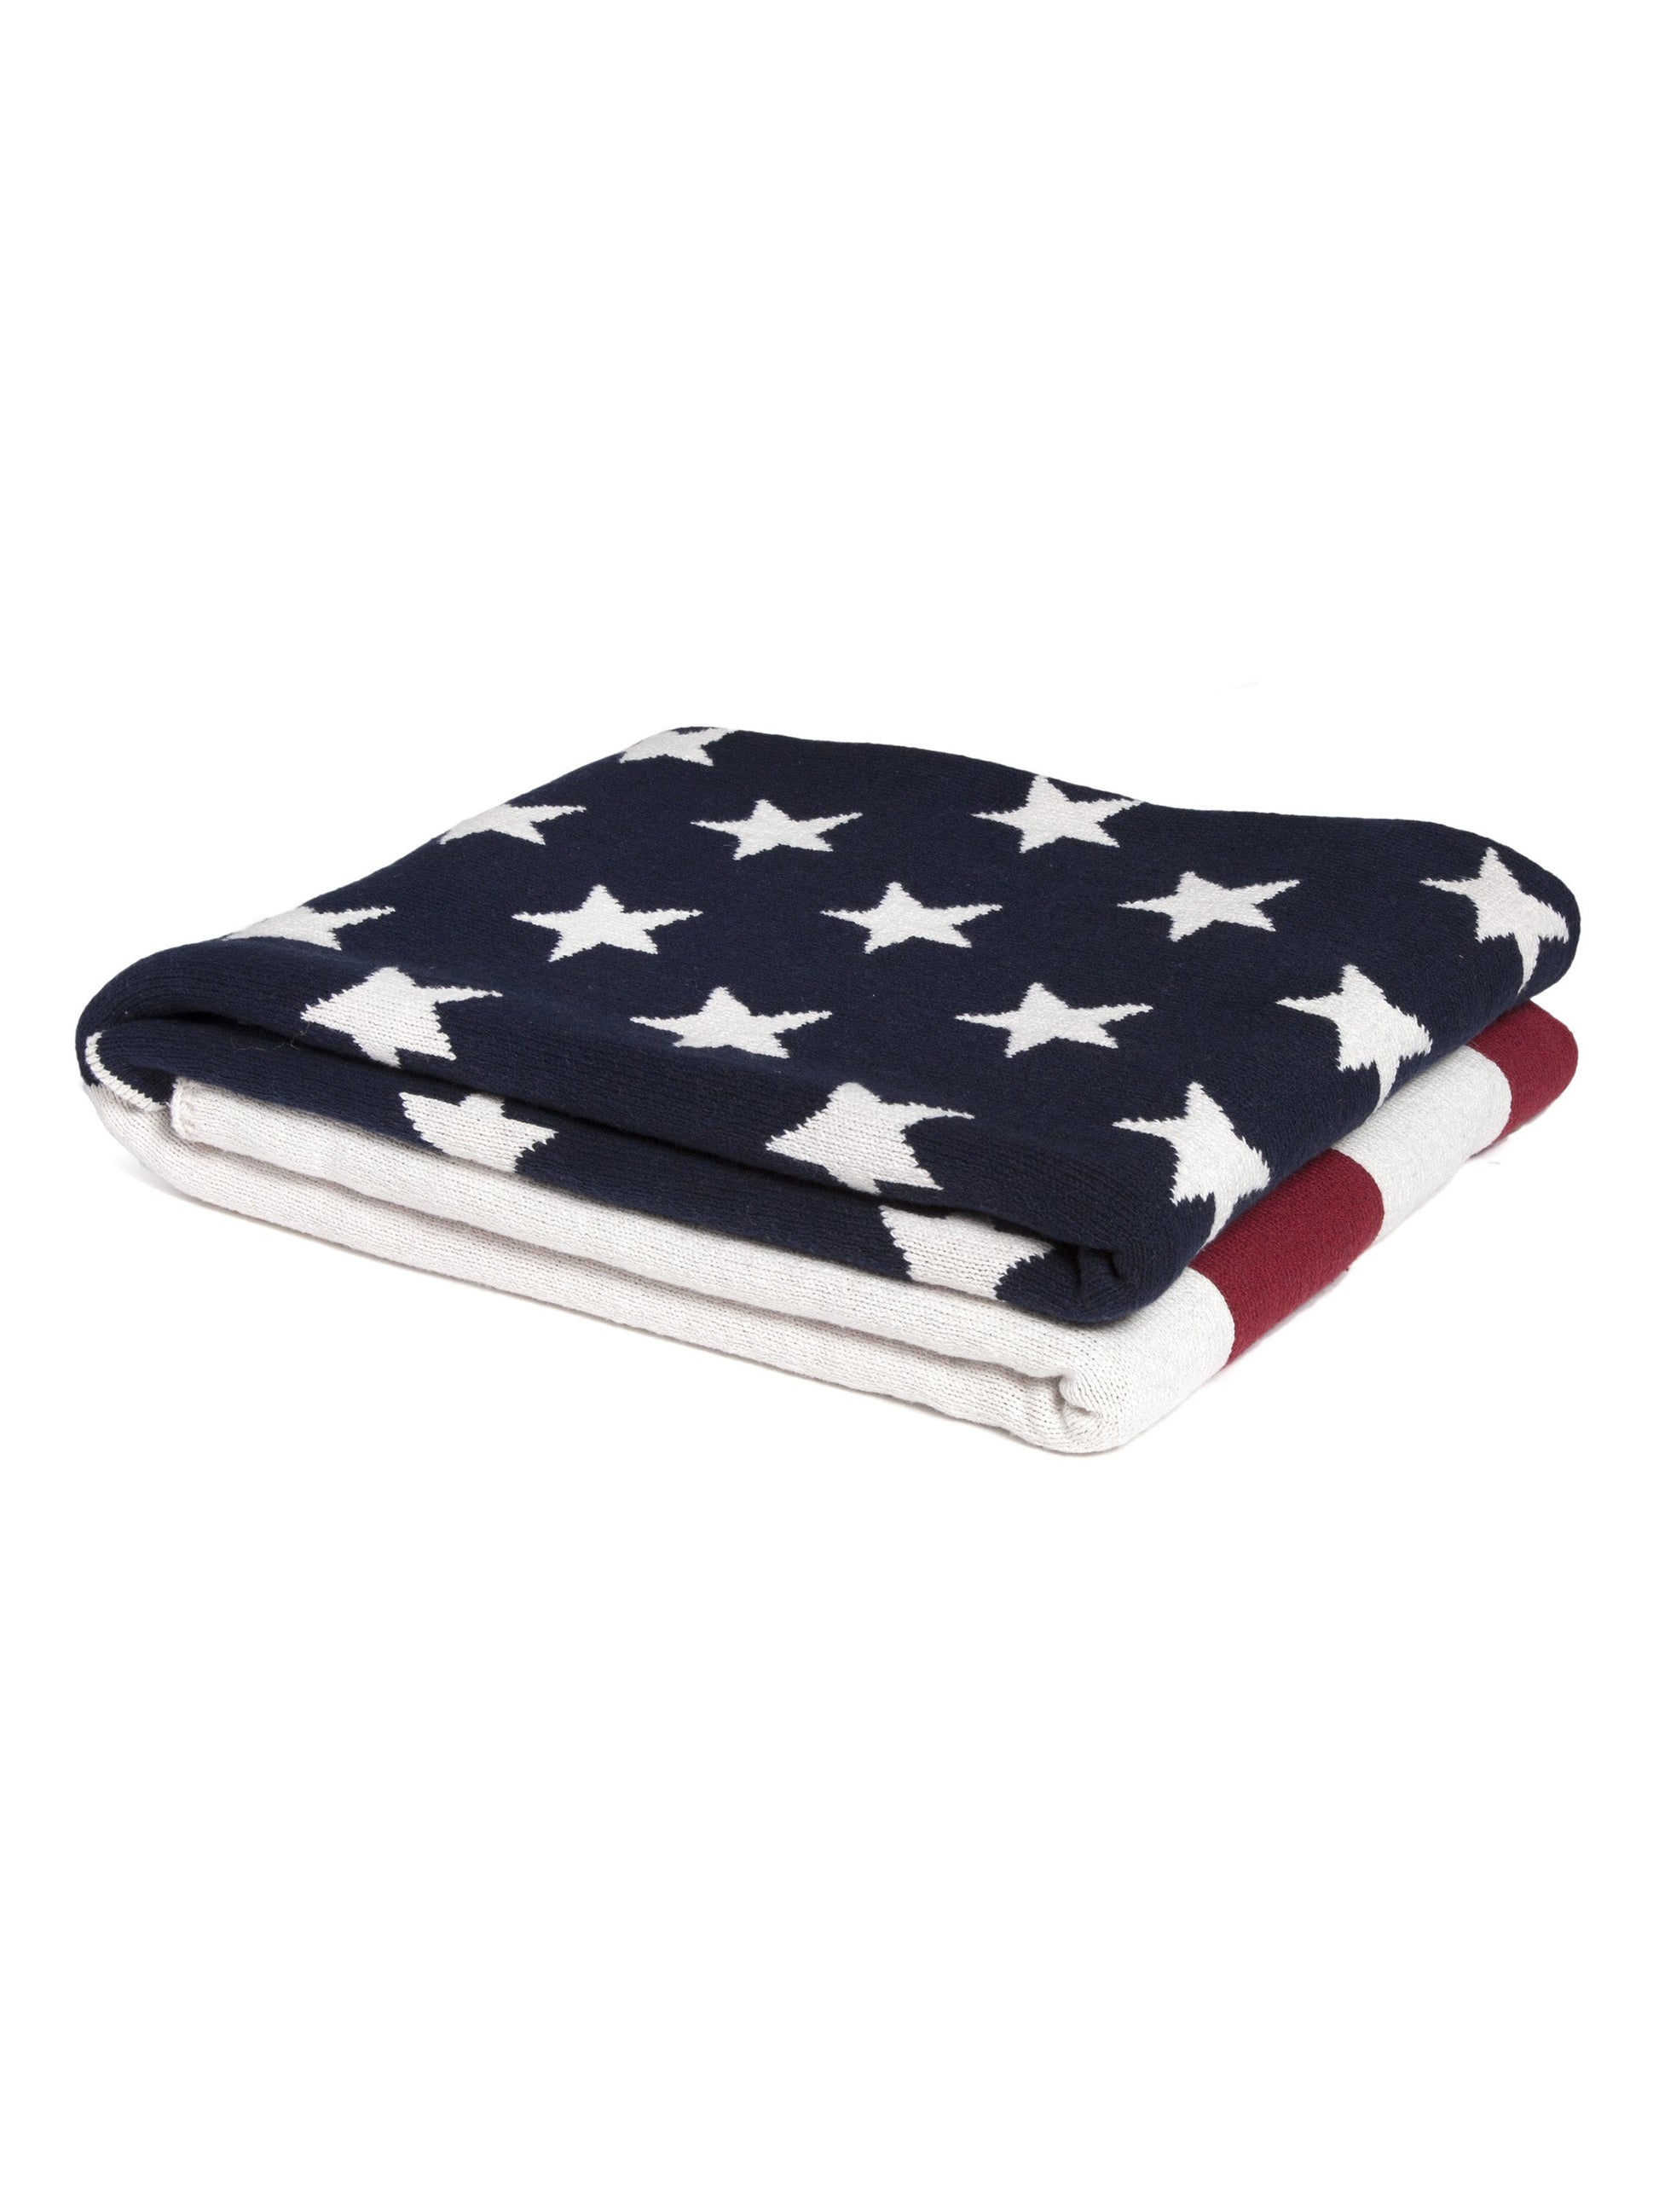 In2Green Eco American Flag Throw Weston Table